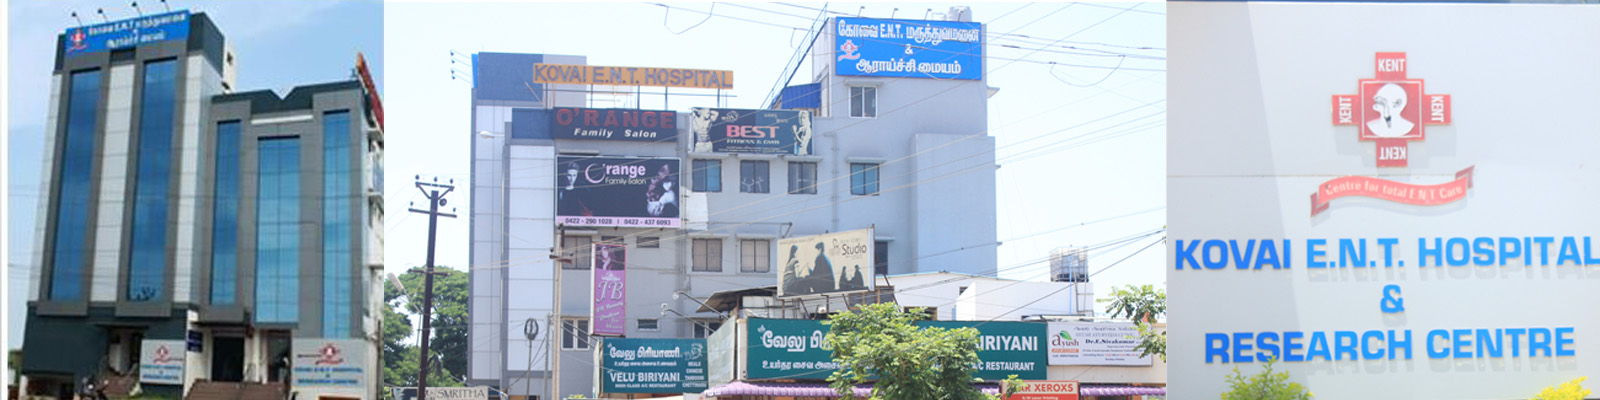 Kovai ENT Hospital & Research Centre Medical Services | Hospitals